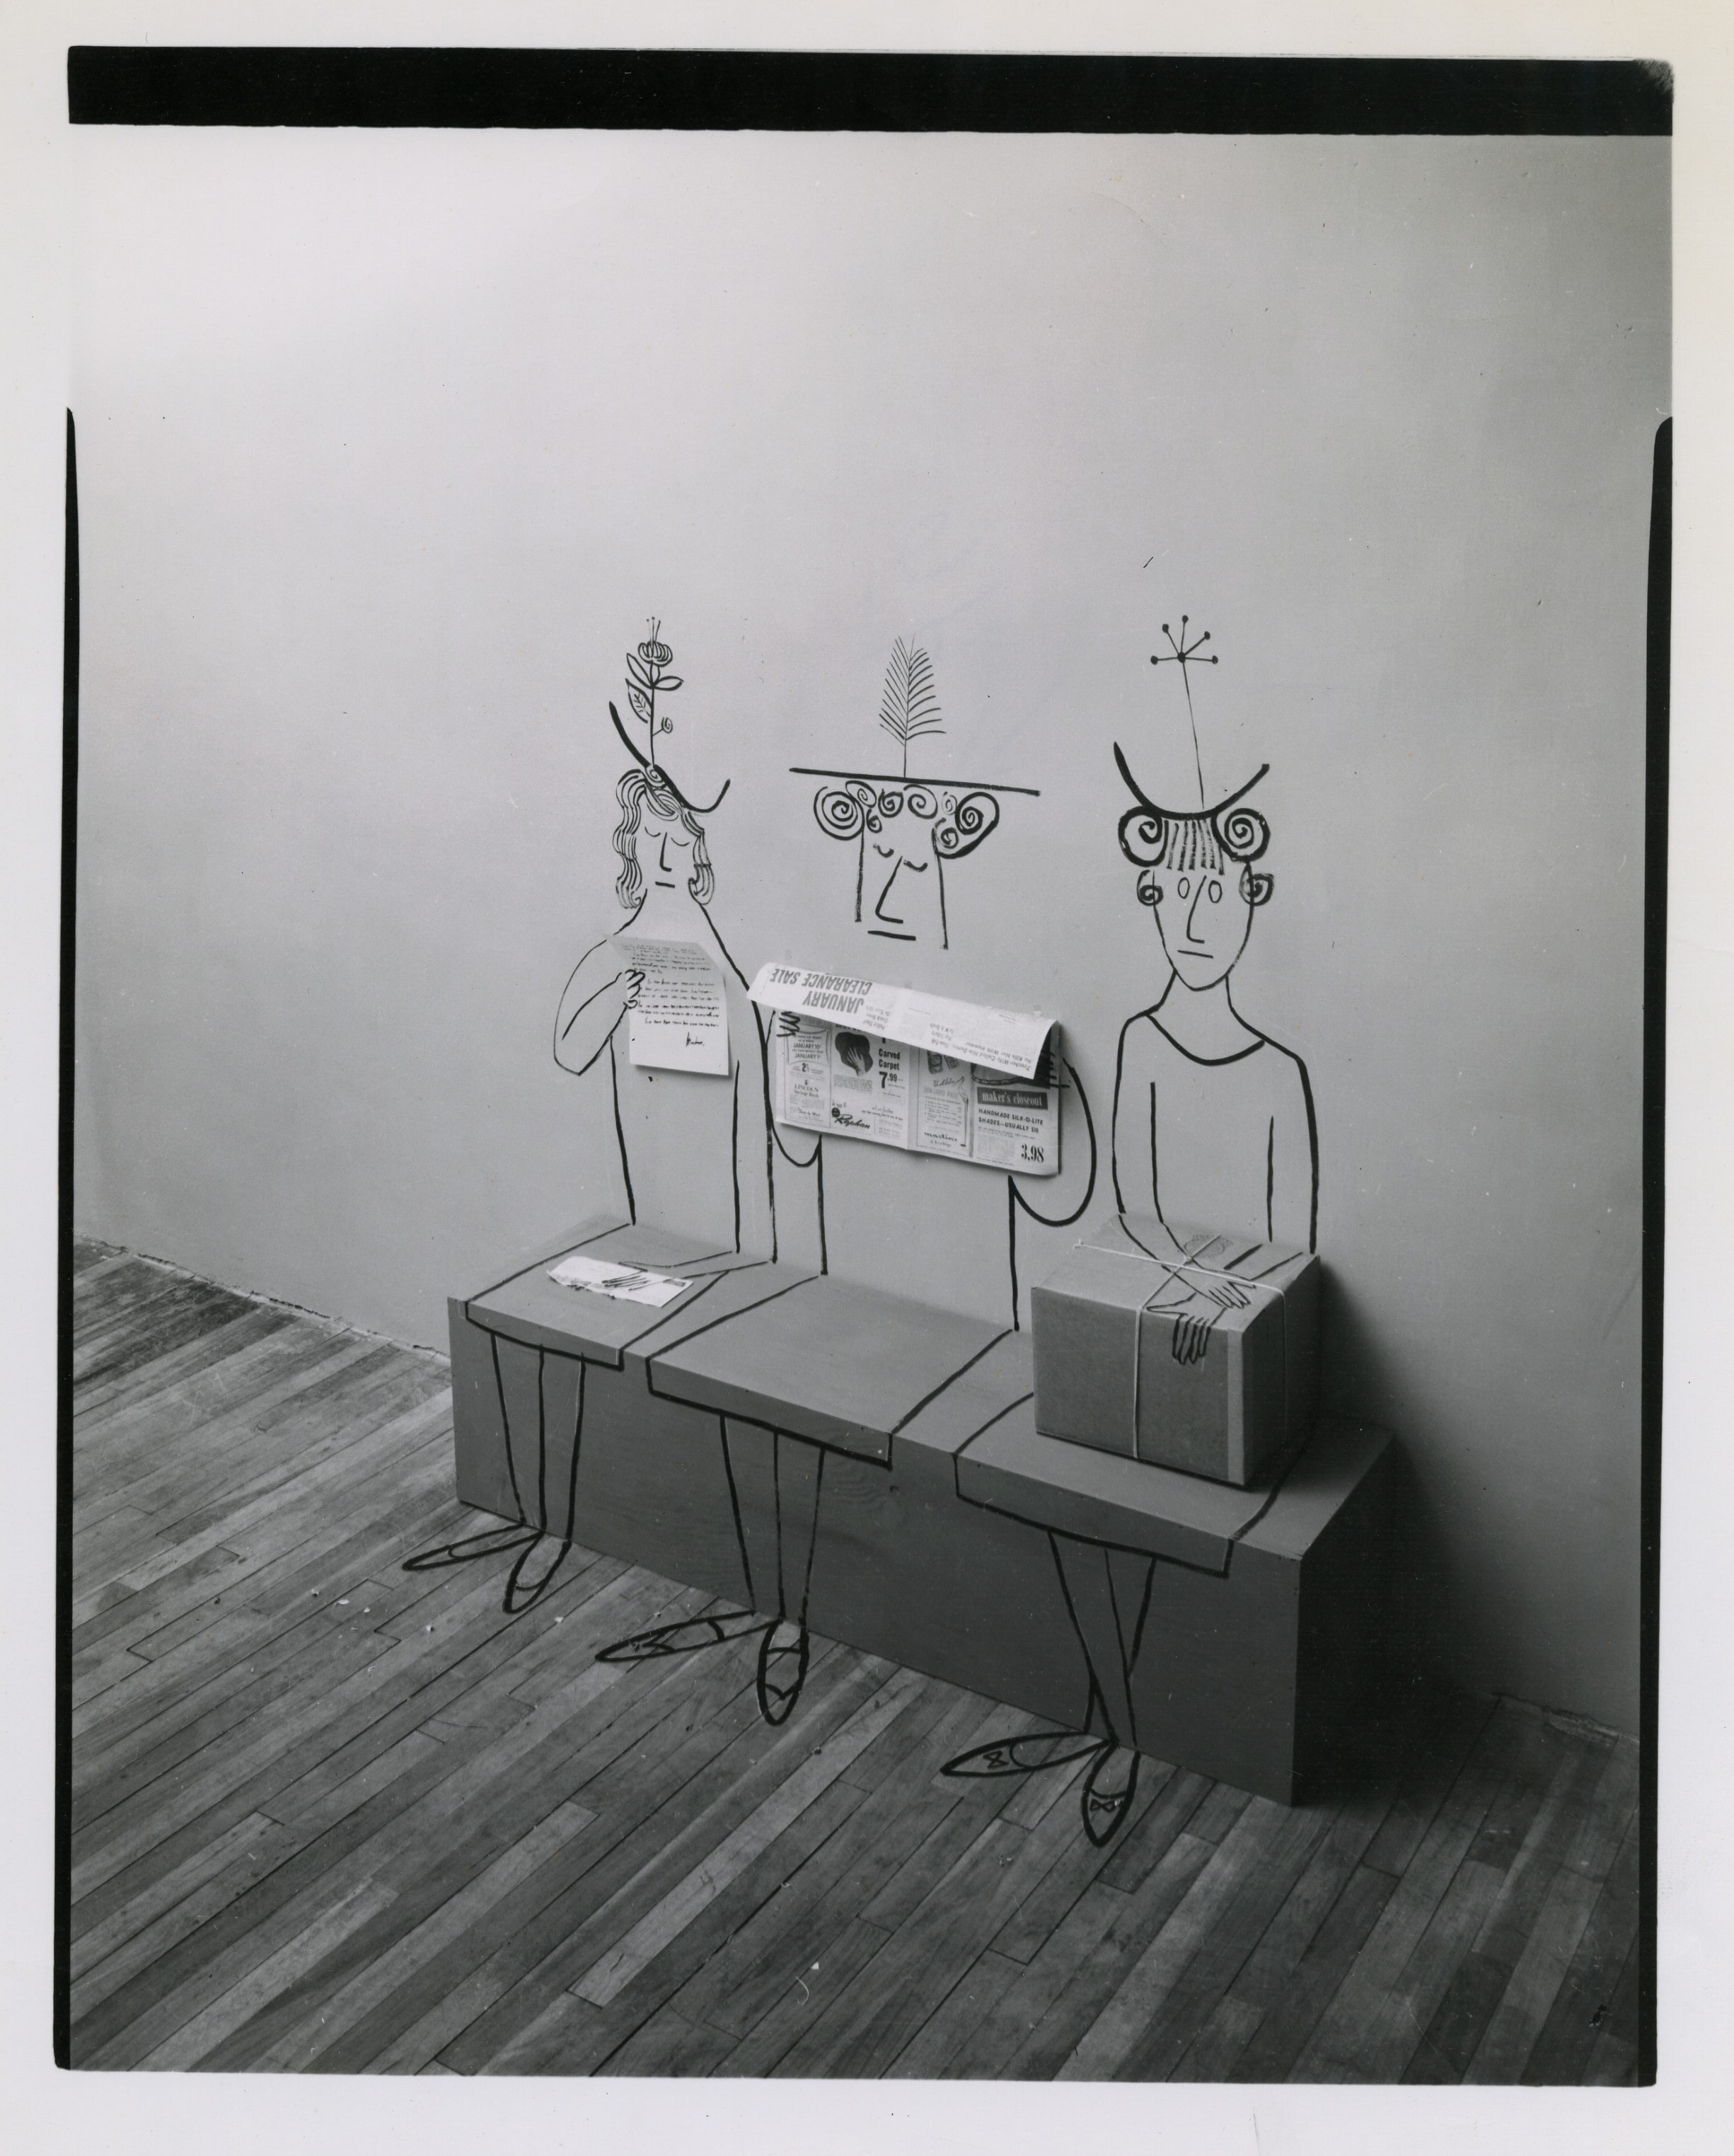 CAMOUFLAGES: METAMORFOSI Saul Steinberg, Senza titolo, 1950 ca., stampa ai sali d’argento, The Saul Steinberg Foundation © The Saul Steinberg Foundation/Artists Rights Society (ARS), New York